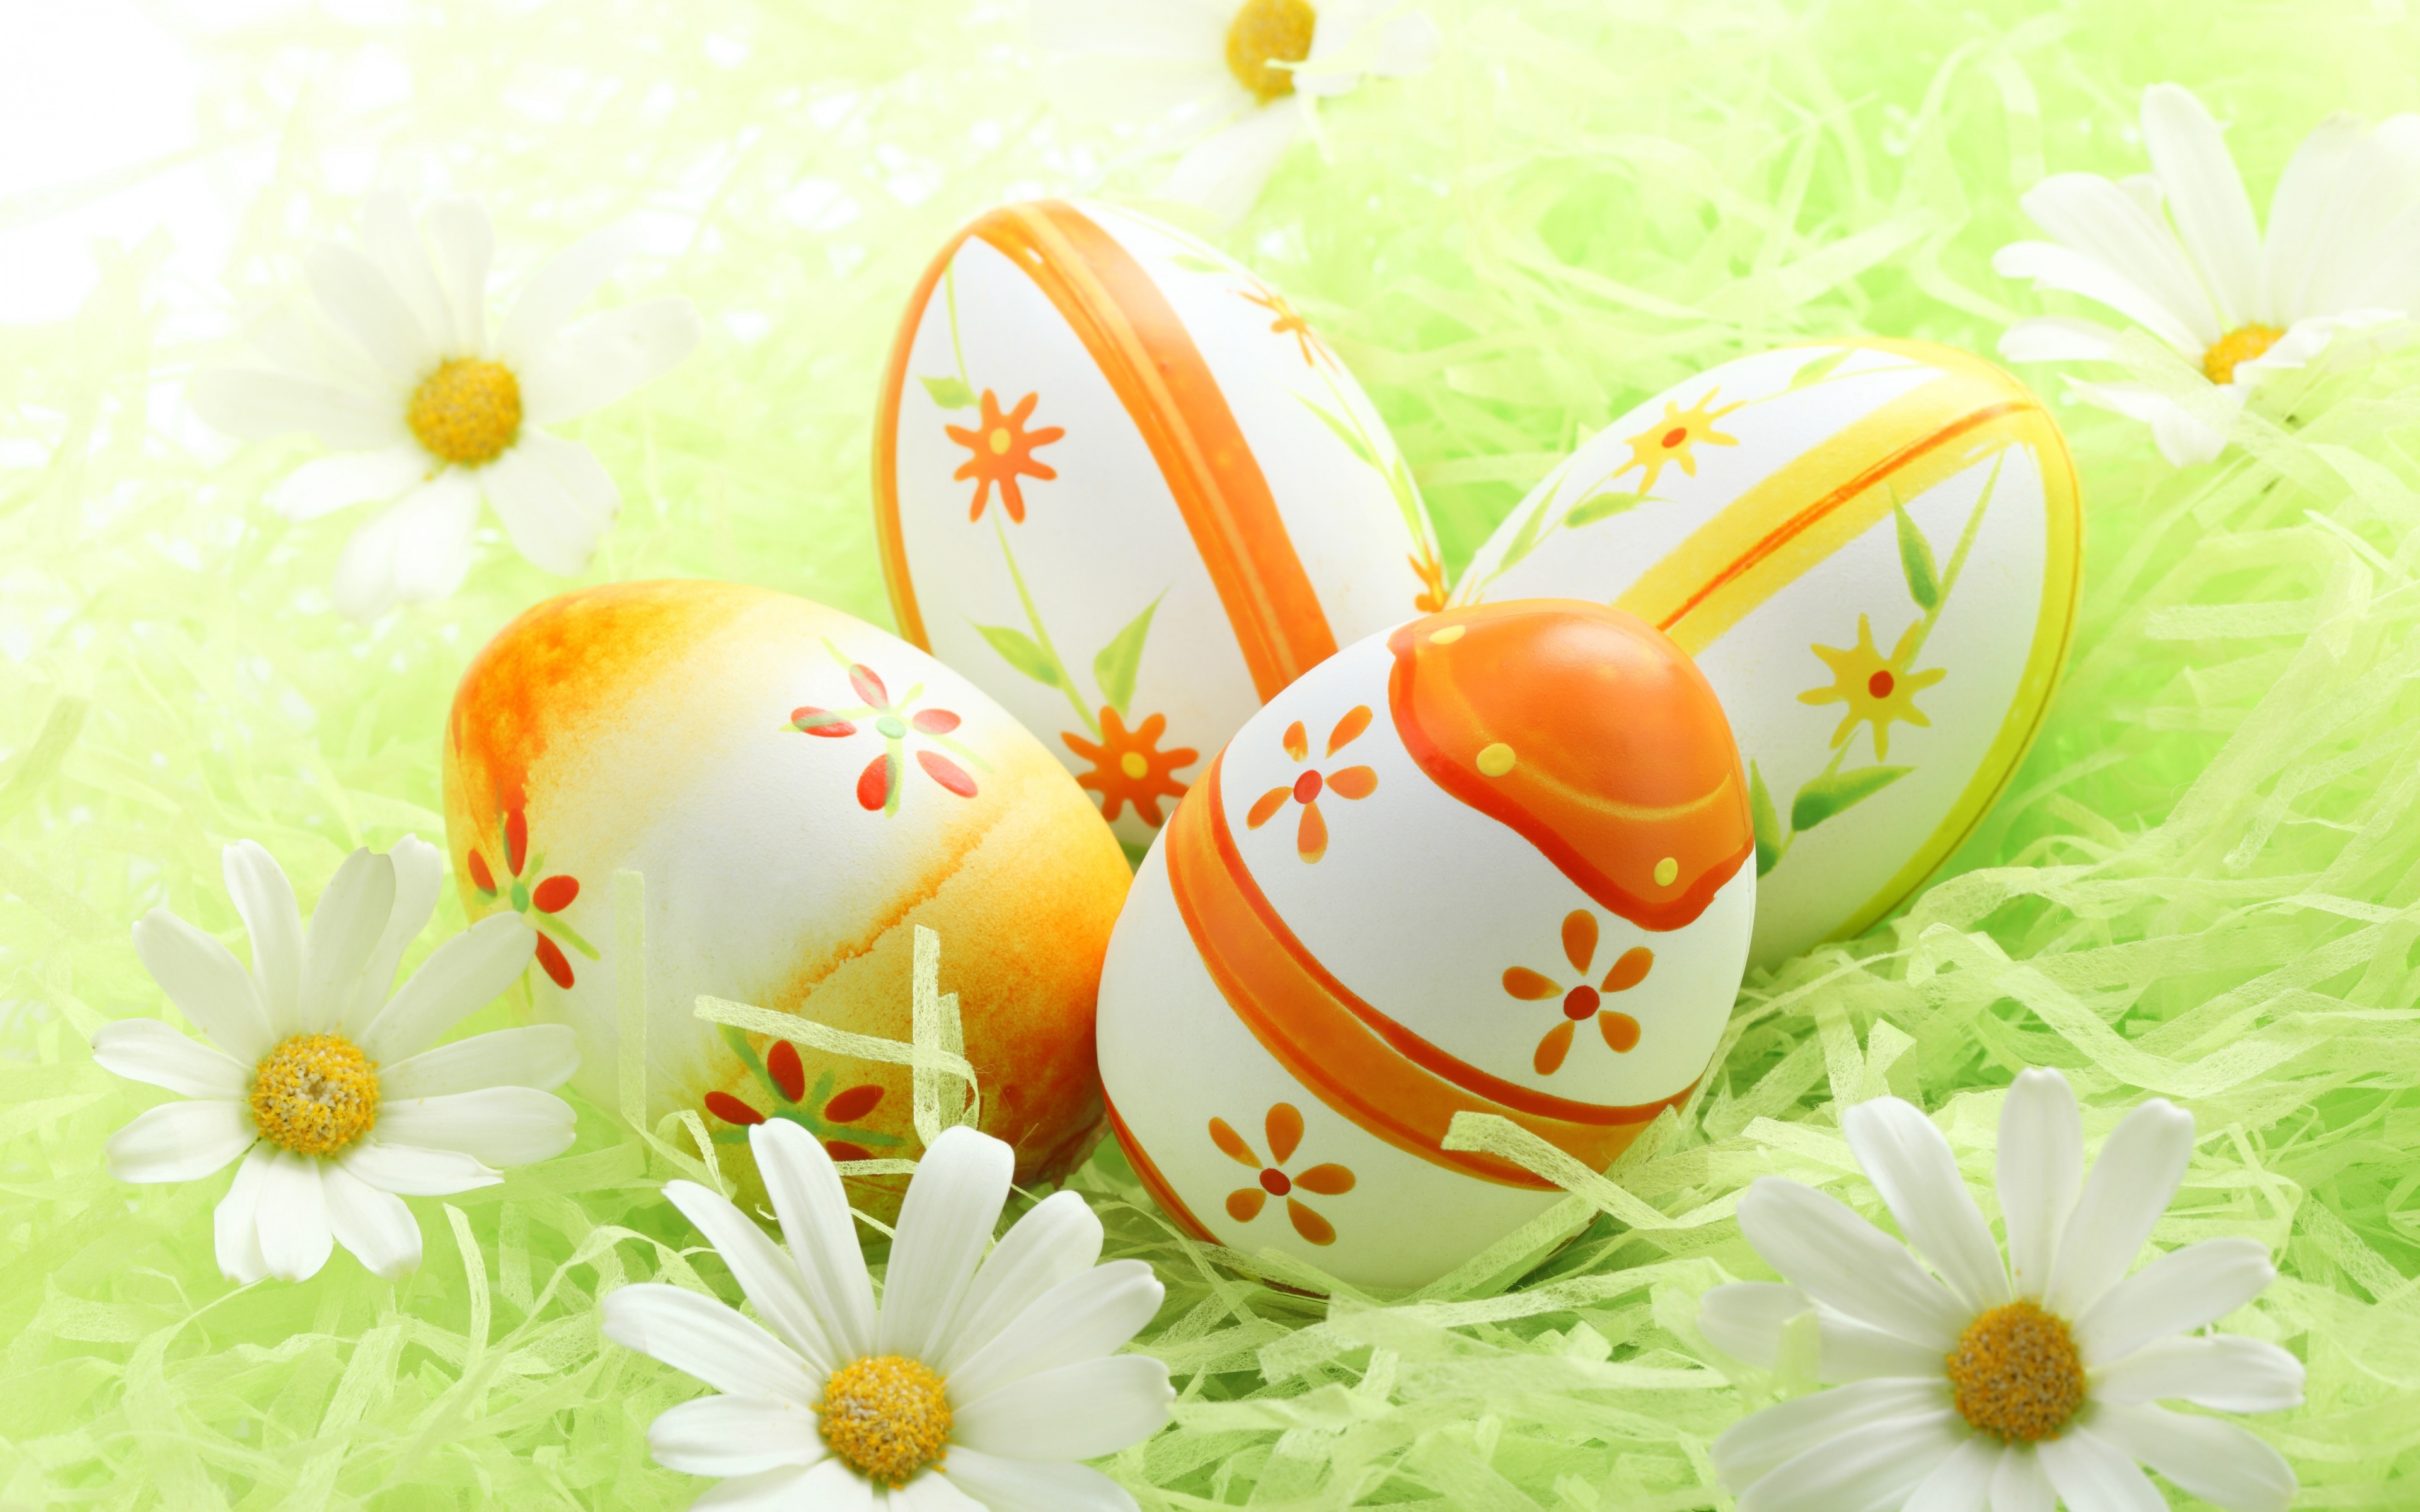 Easter Eggs Among The Daisies